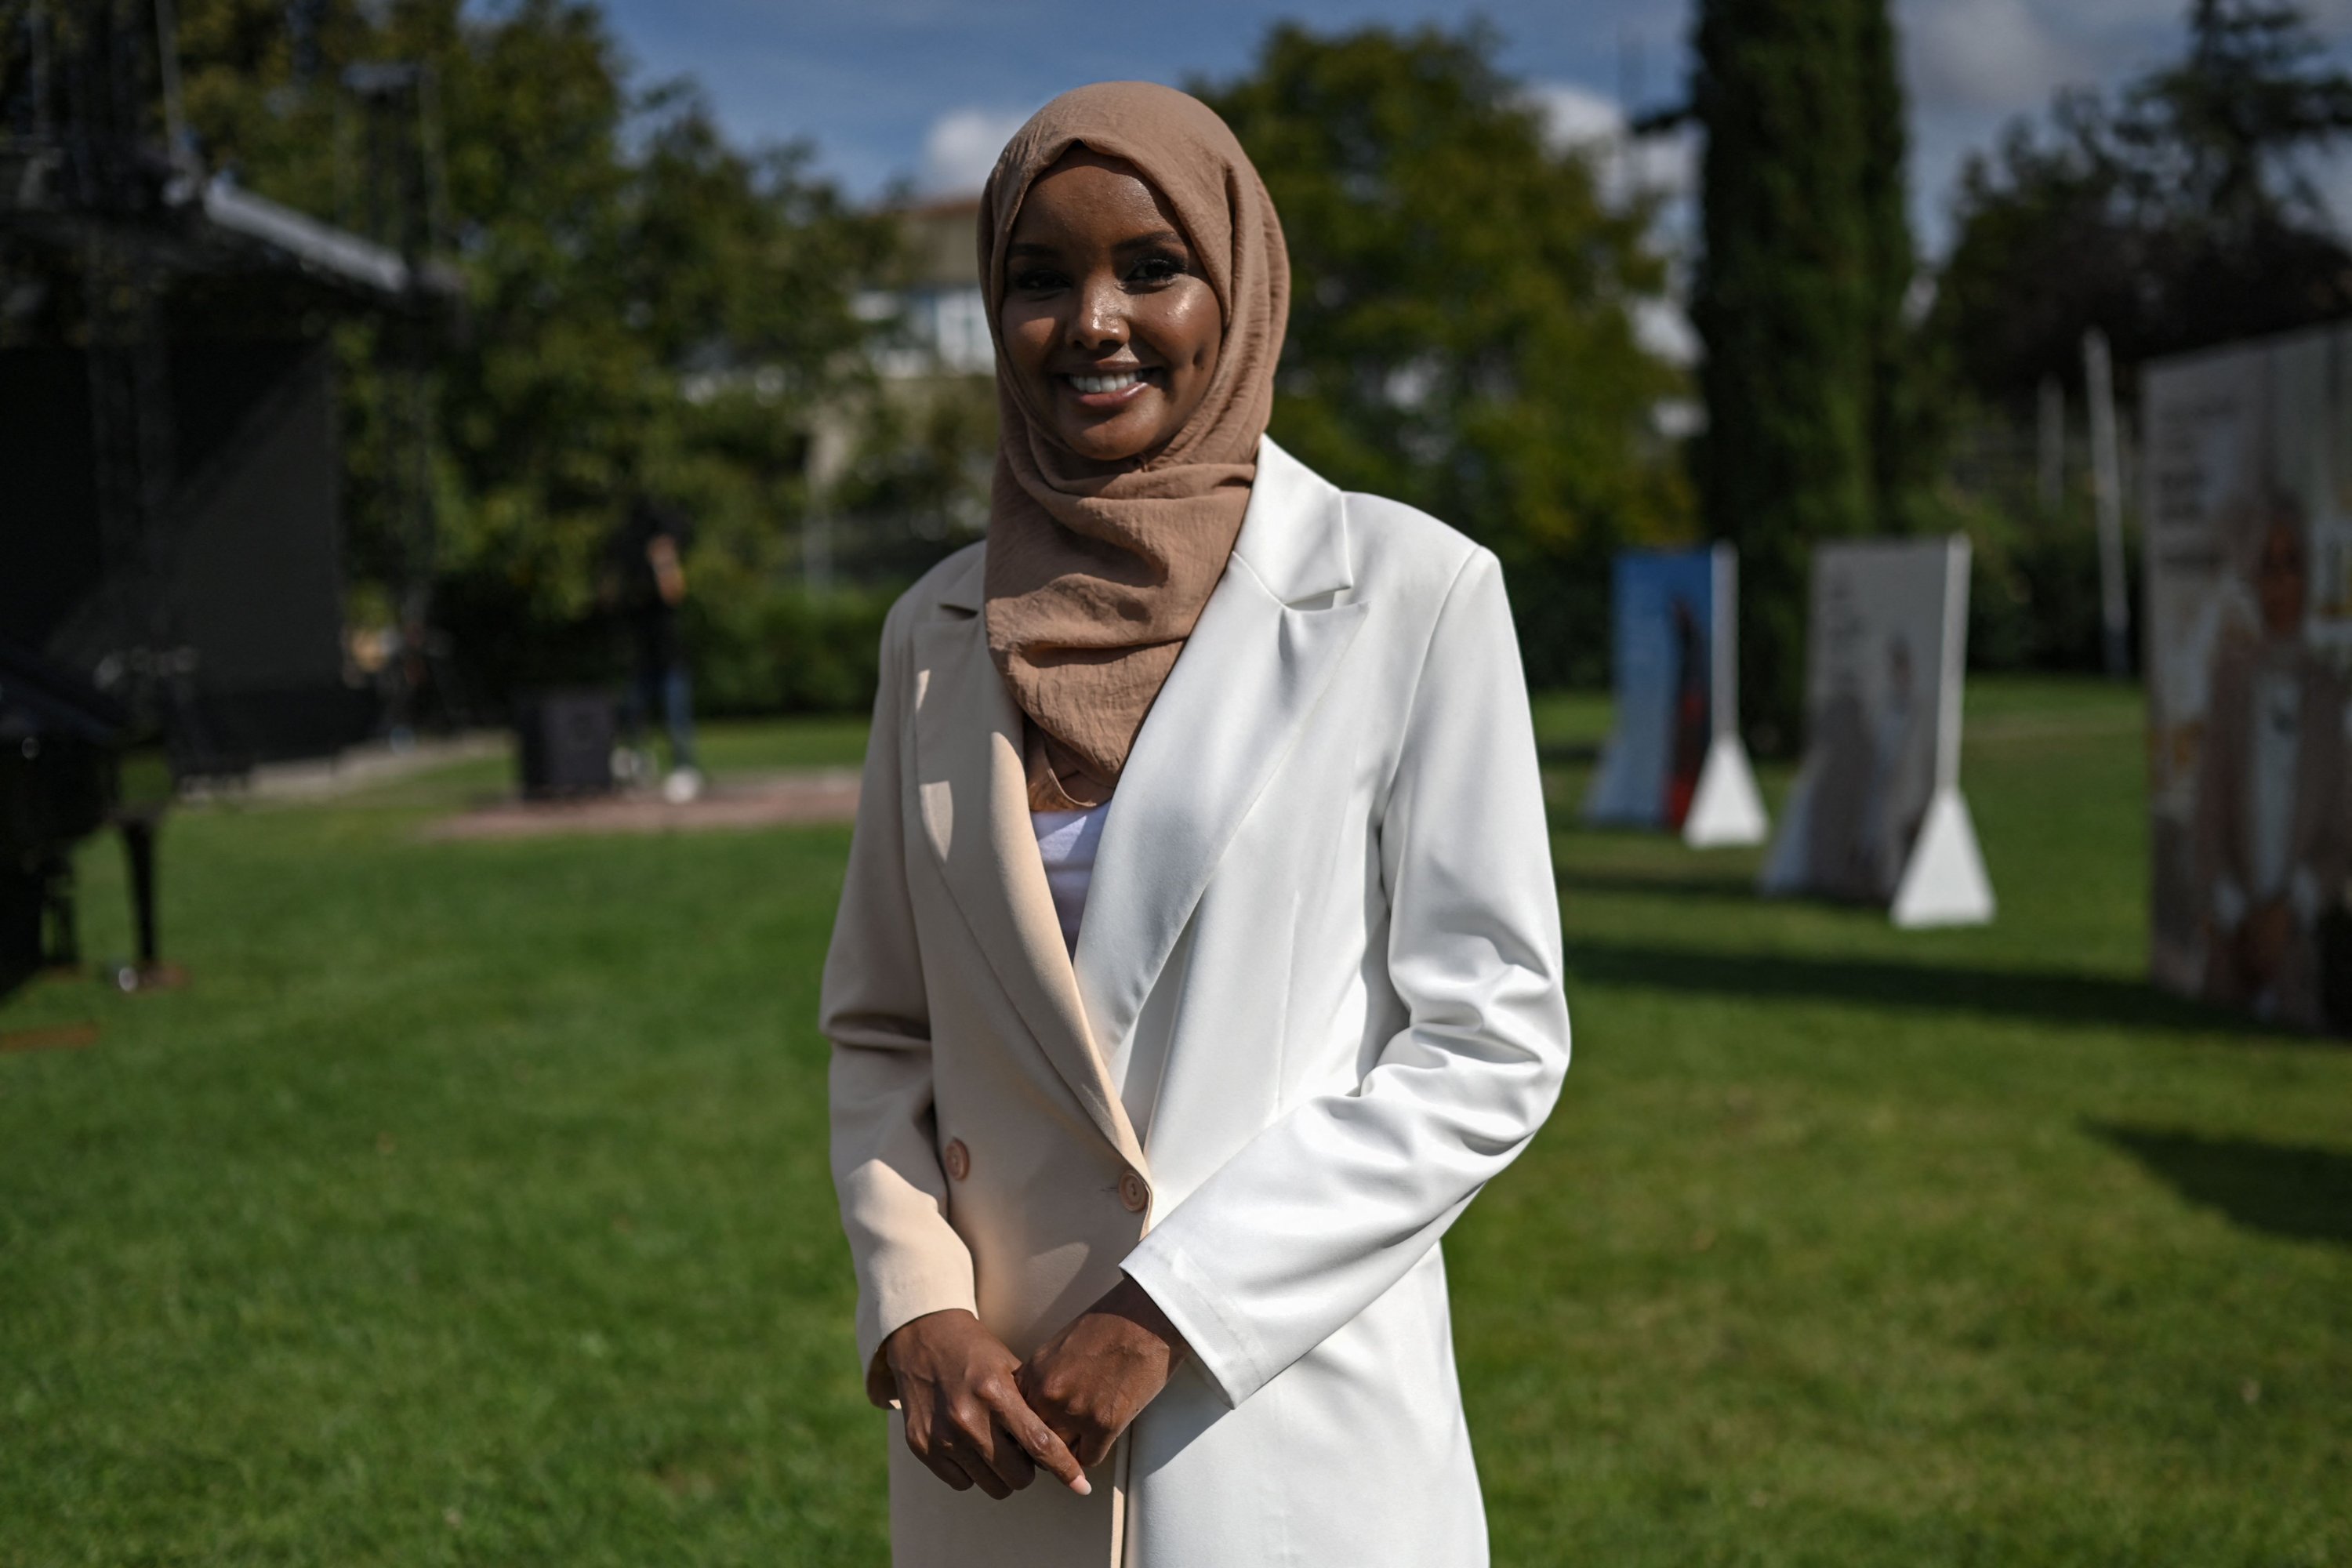 Somali-American former model Halima Aden poses for a photo, during an event in Istanbul, Turkey, Sept. 14, 2021. (AFP Photo)